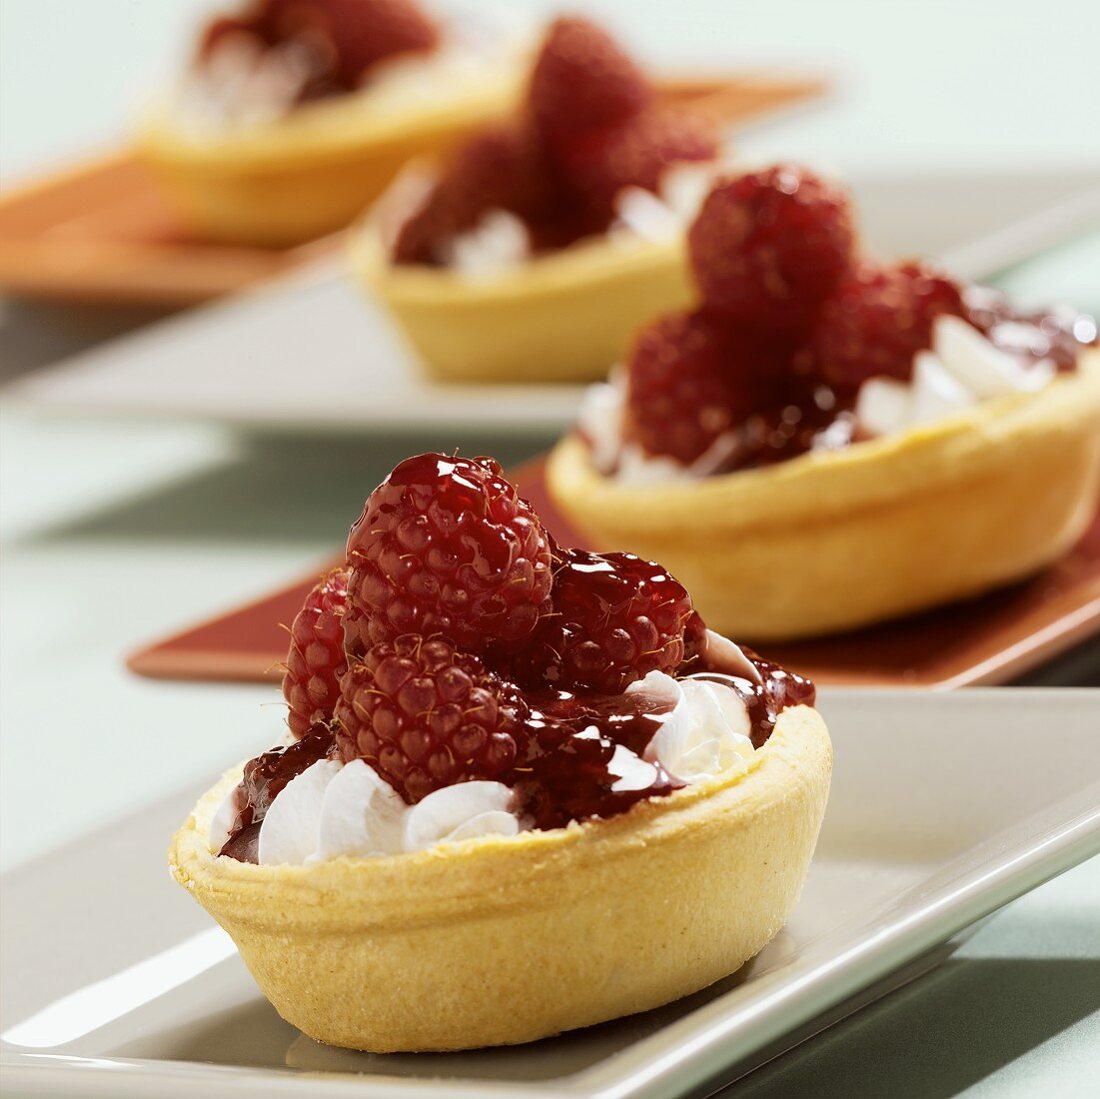 Raspberries and Whipped Cream in a Pastry Shell